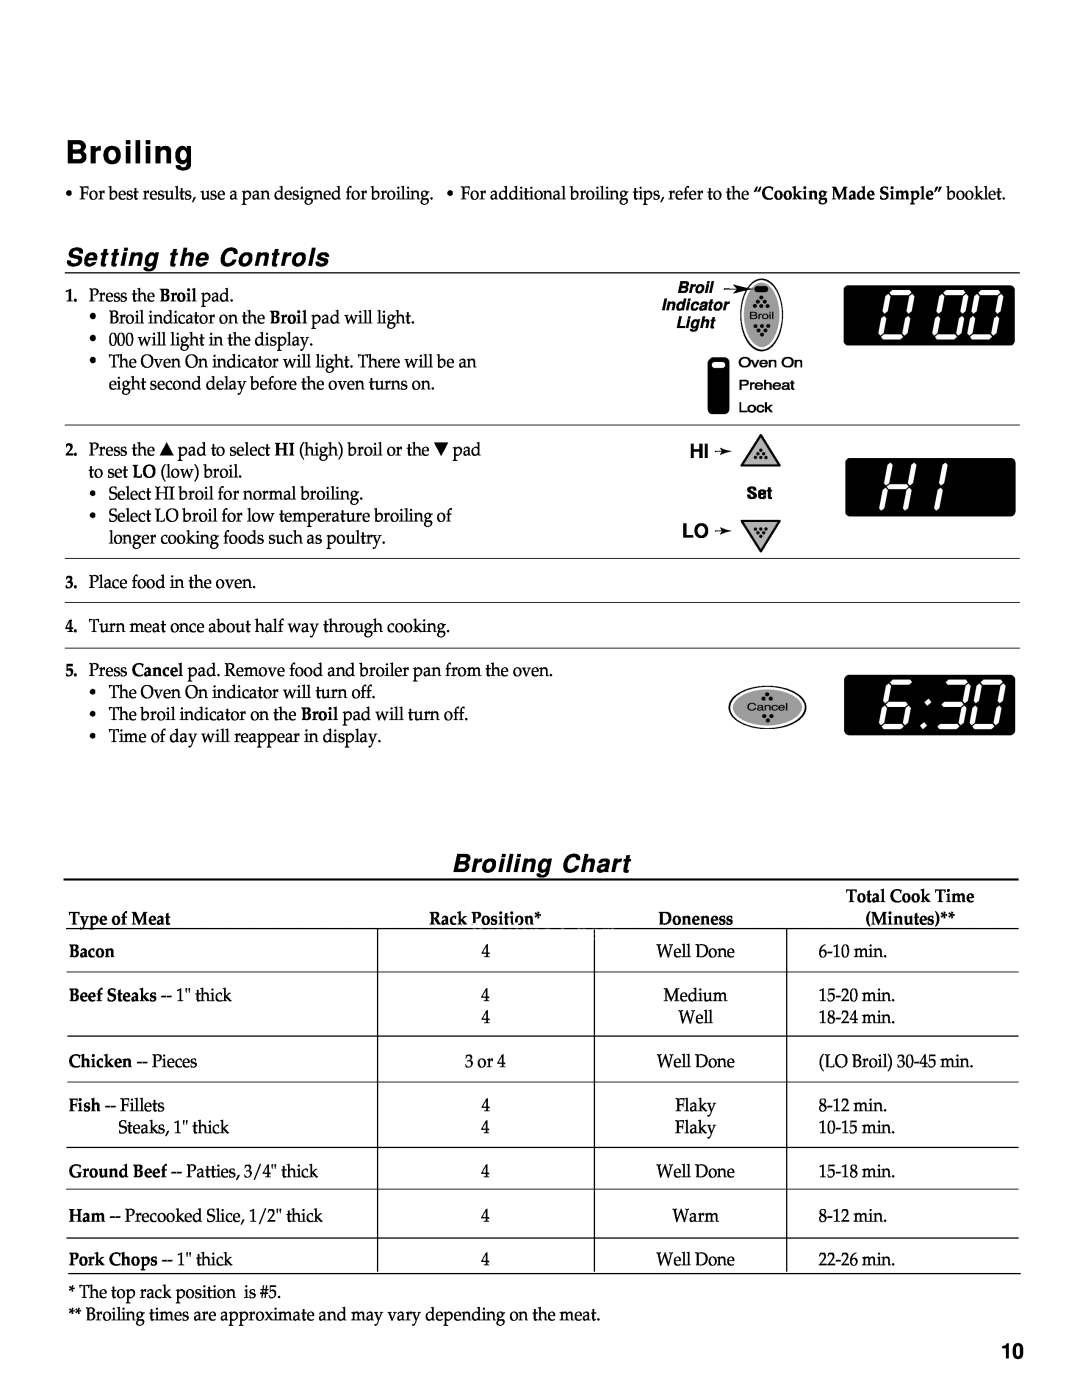 Maytag RS-1 manual Broiling Chart, Setting the Controls, Hi Lo, Total Cook Time, Type of Meat, Minutes, Bacon 